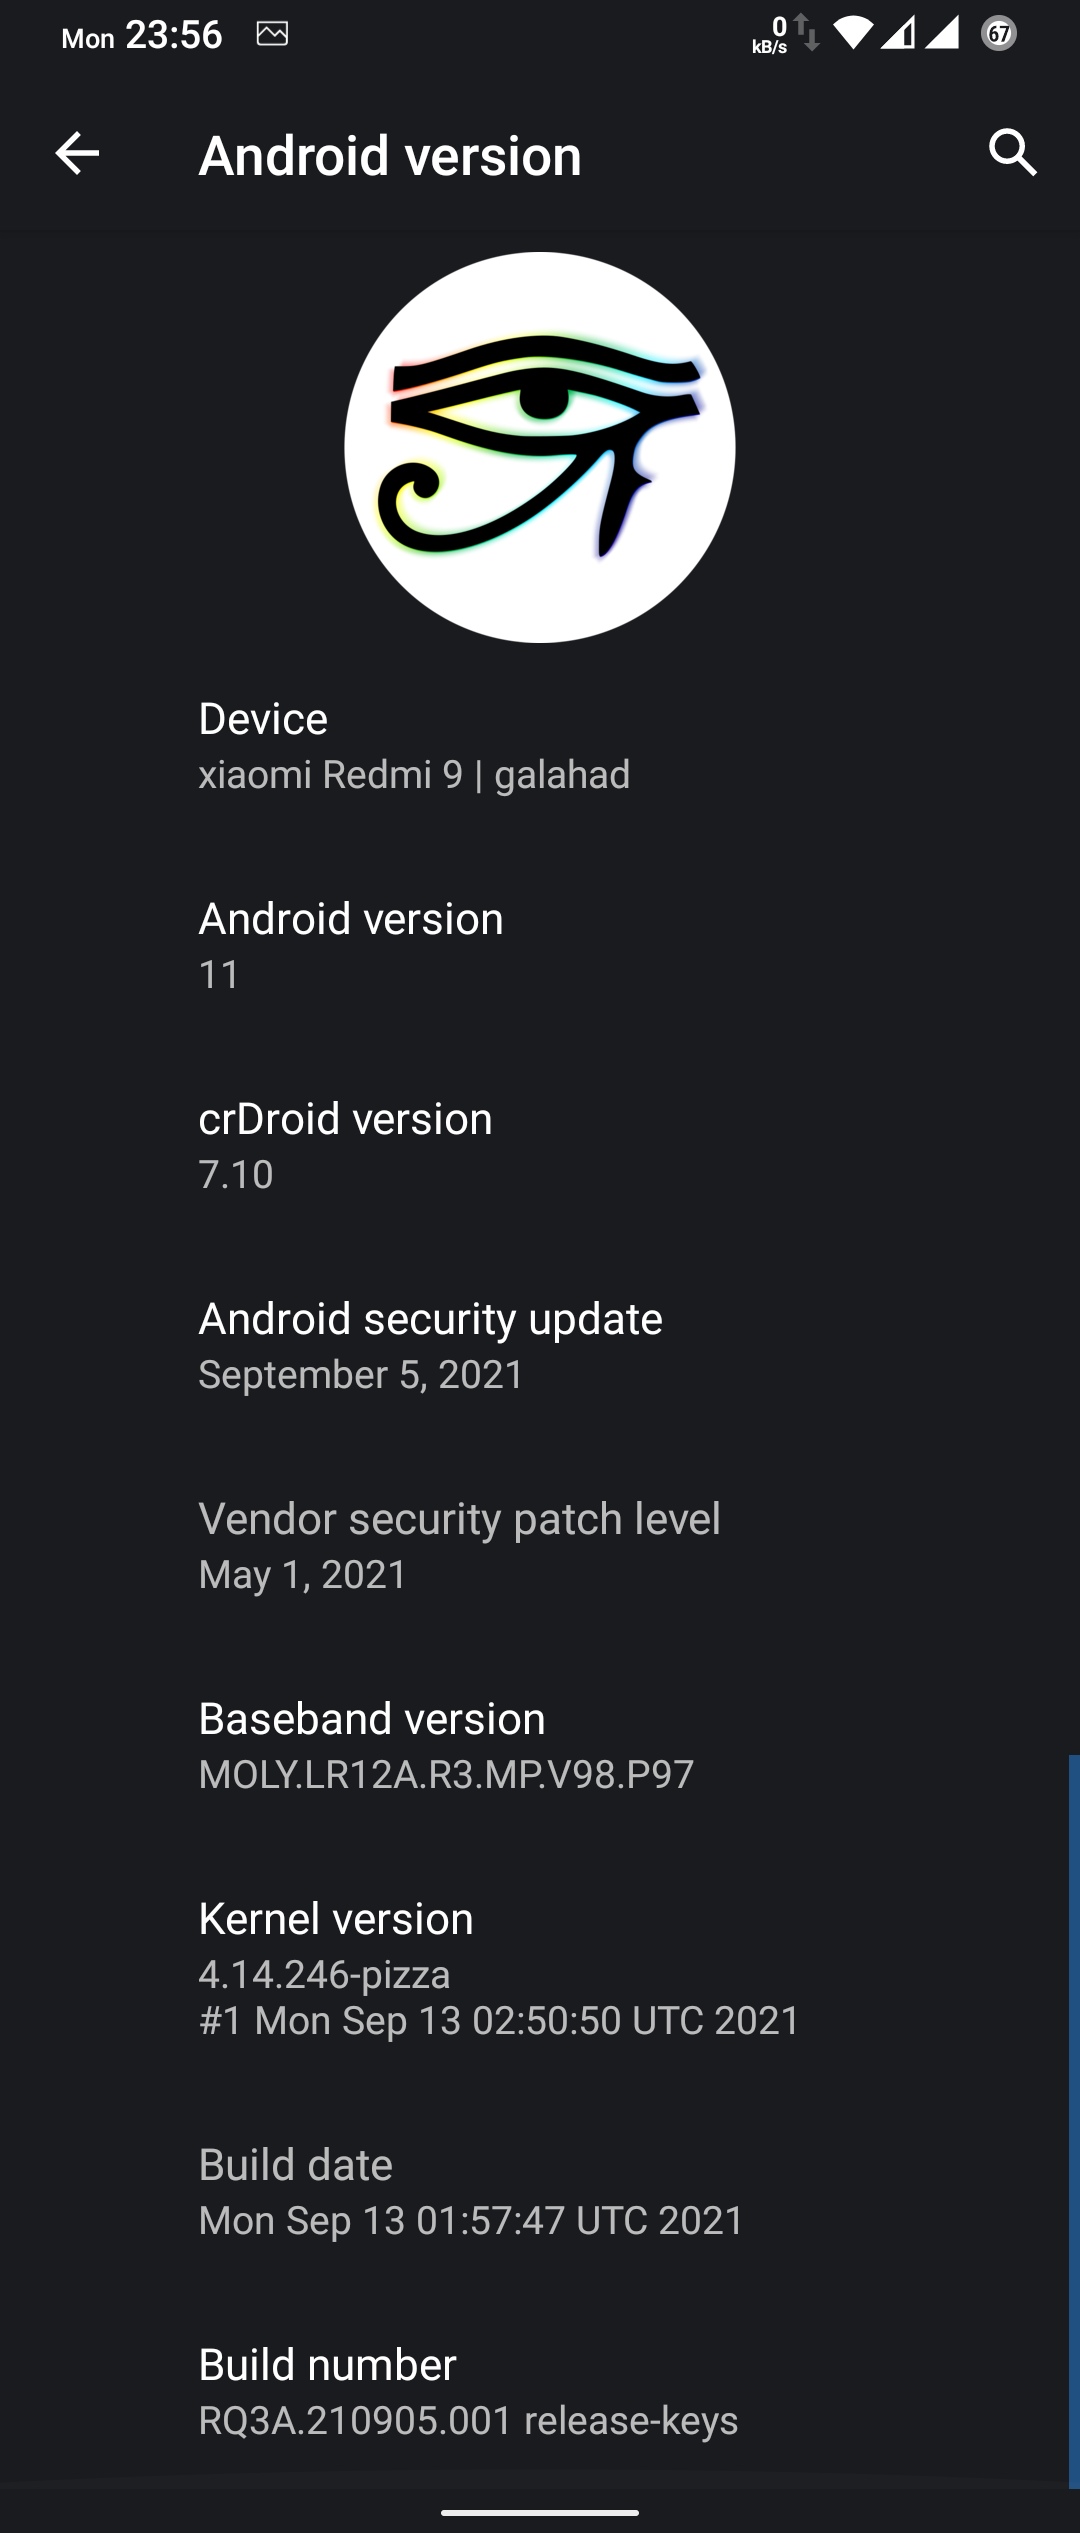 crdroid-android-rom-xiaomi-redmi-9-crdroid-status